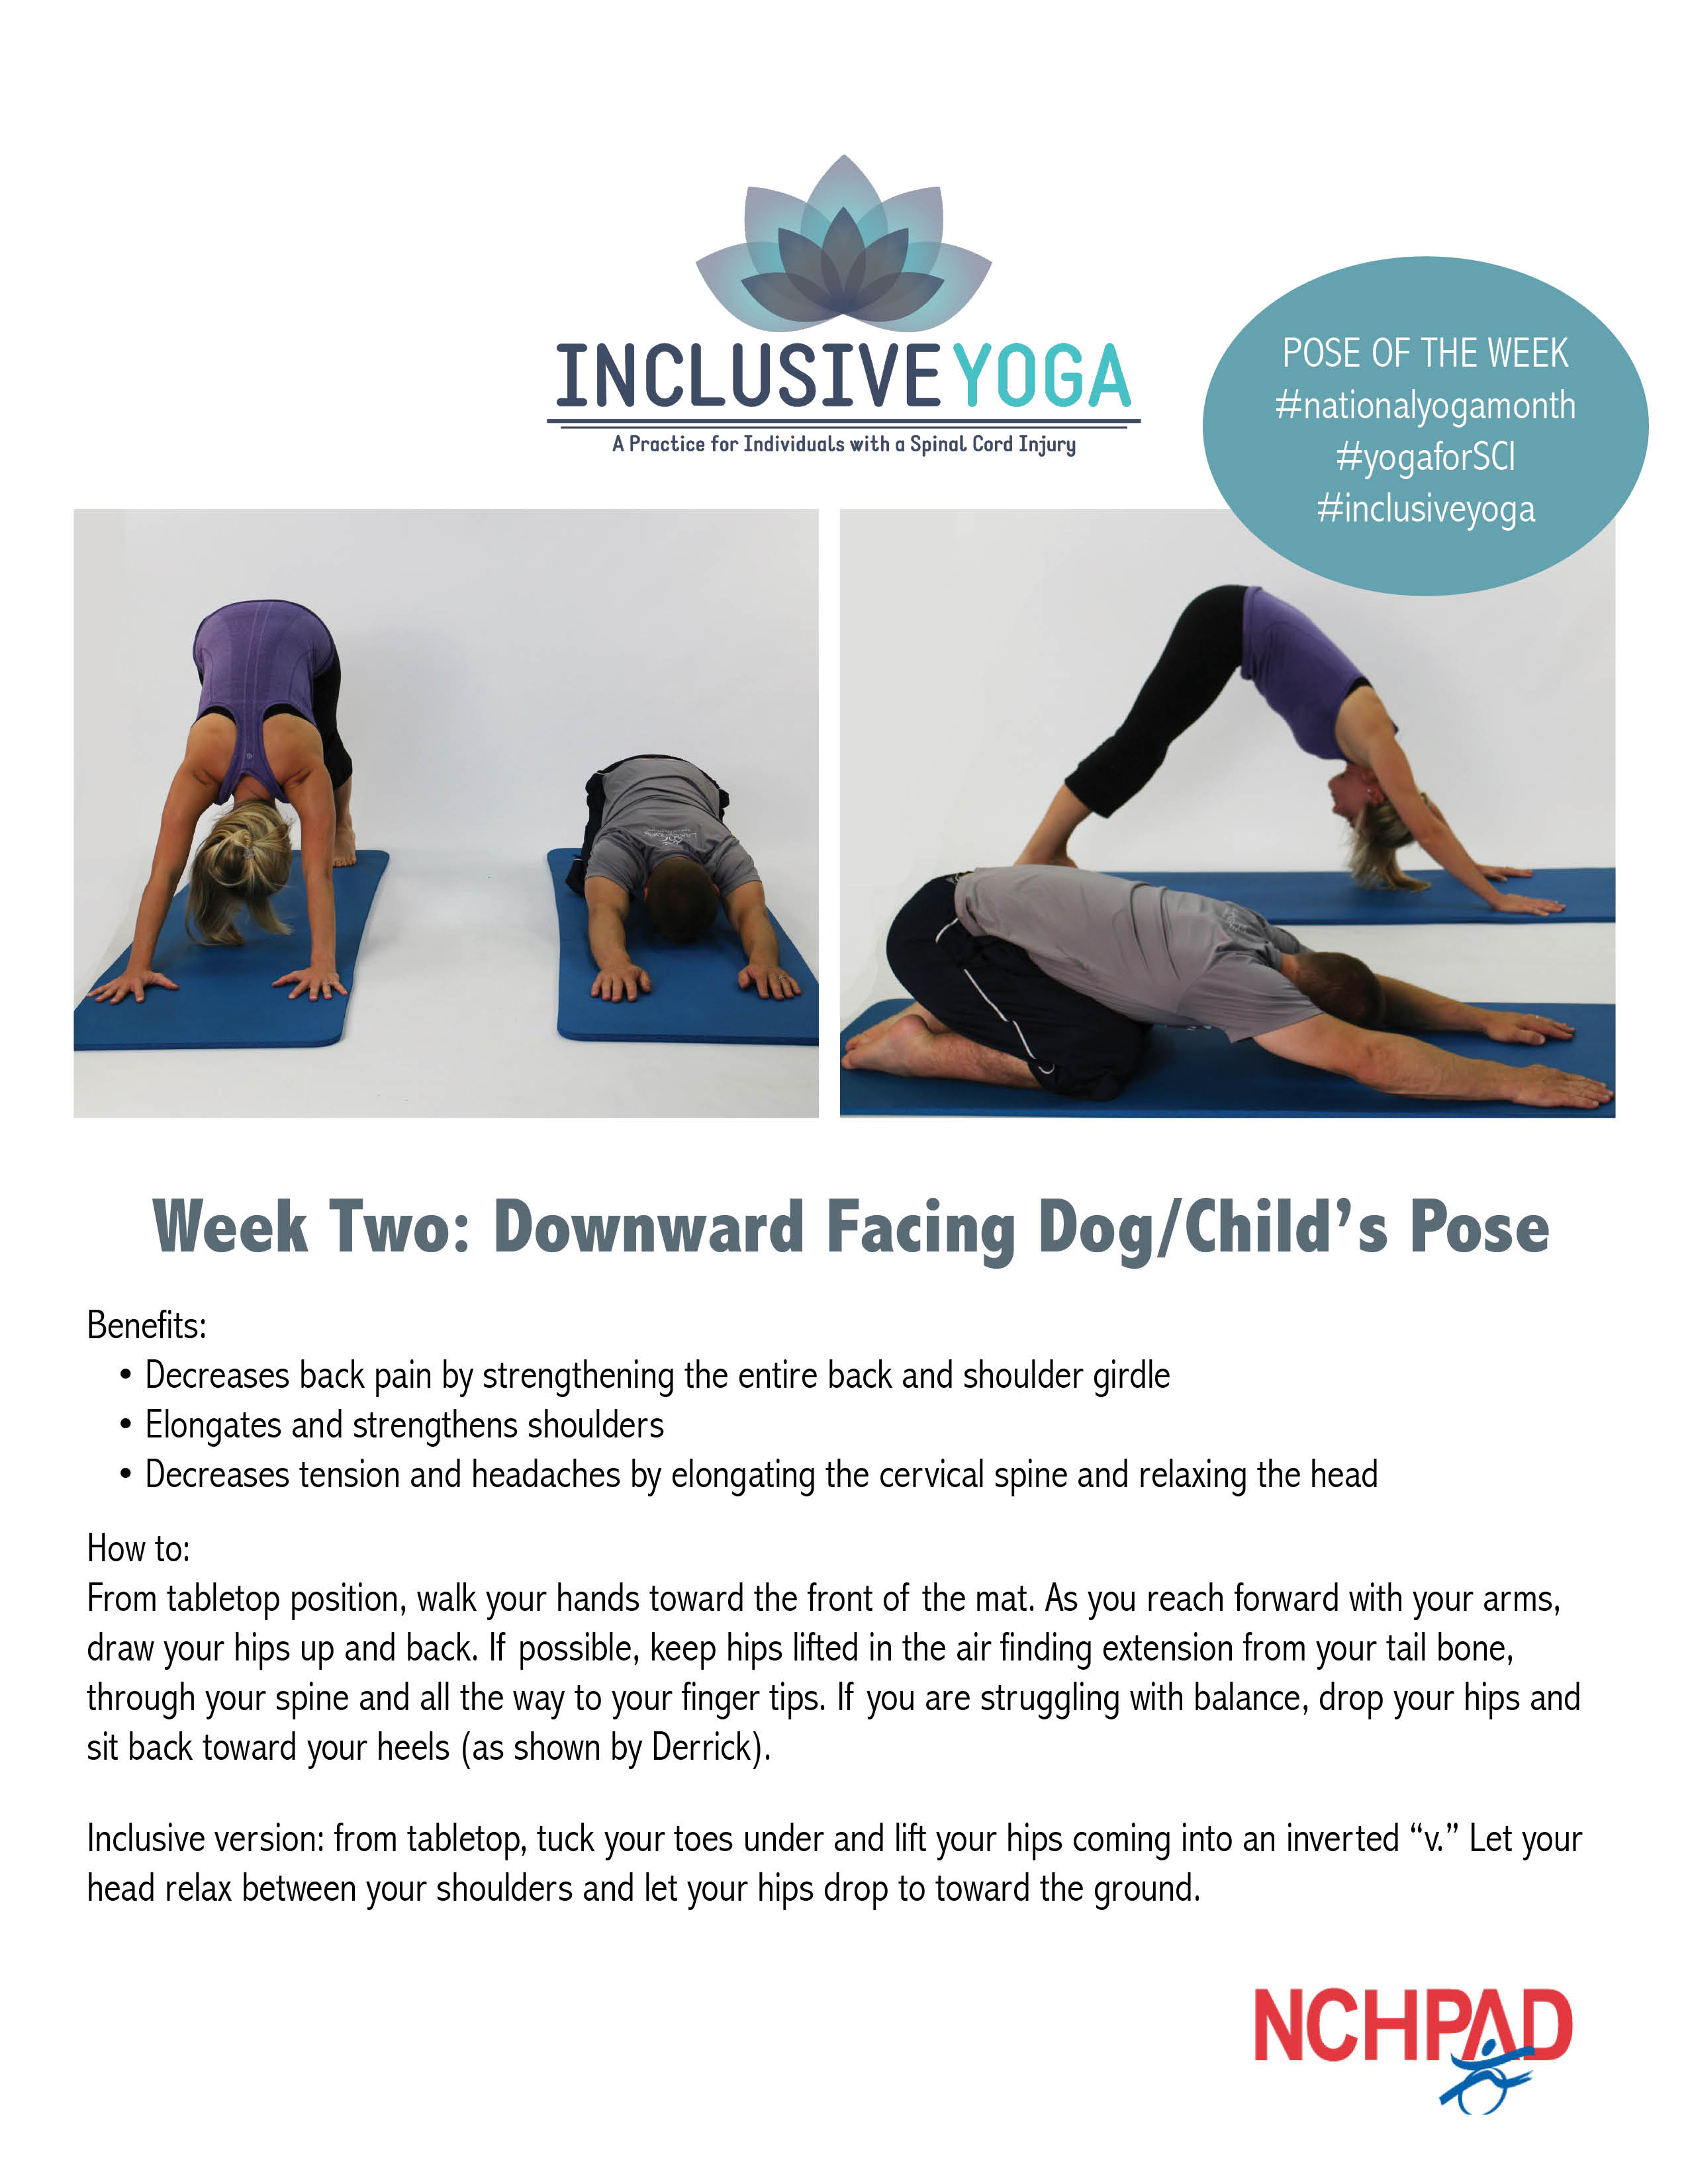 15 Easy Yoga Poses For Beginners - Printable PDF Download